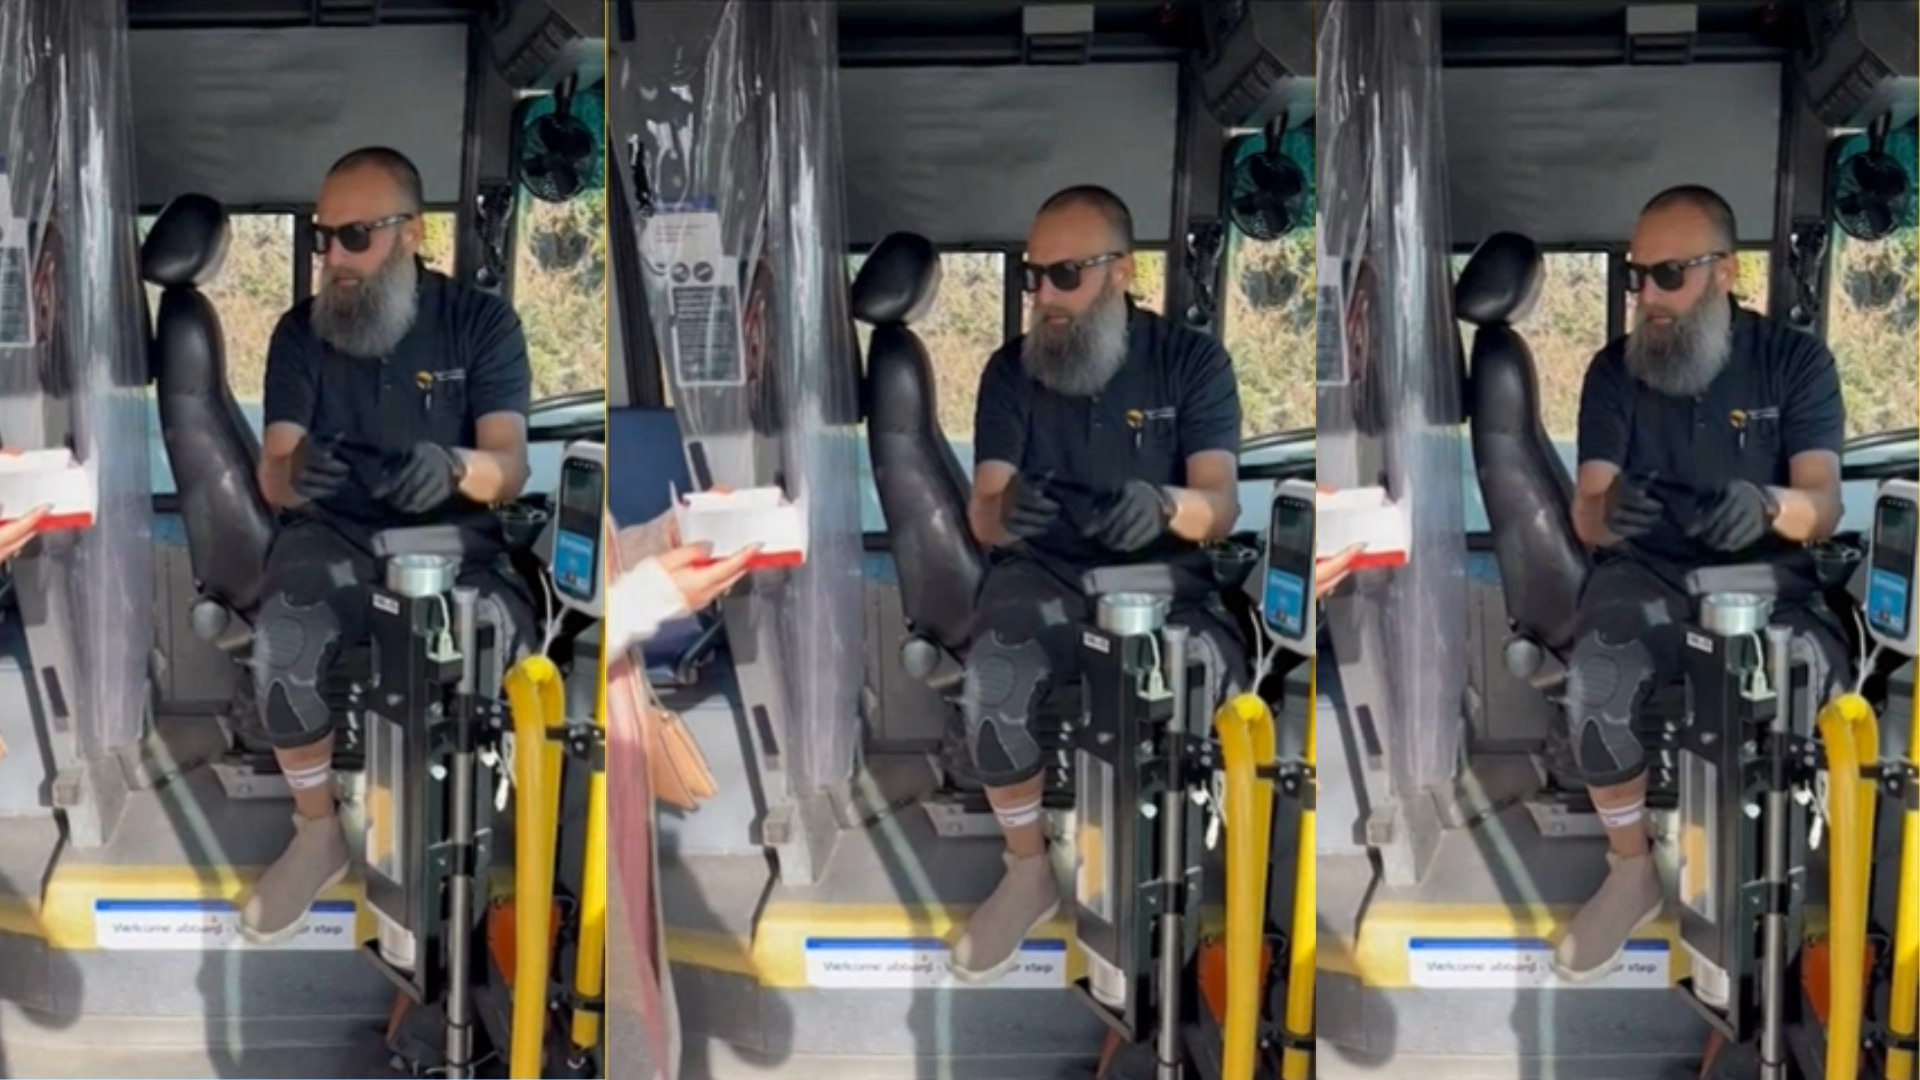 This bus driver just serenaded a passenger on her birthday — and it's adorable